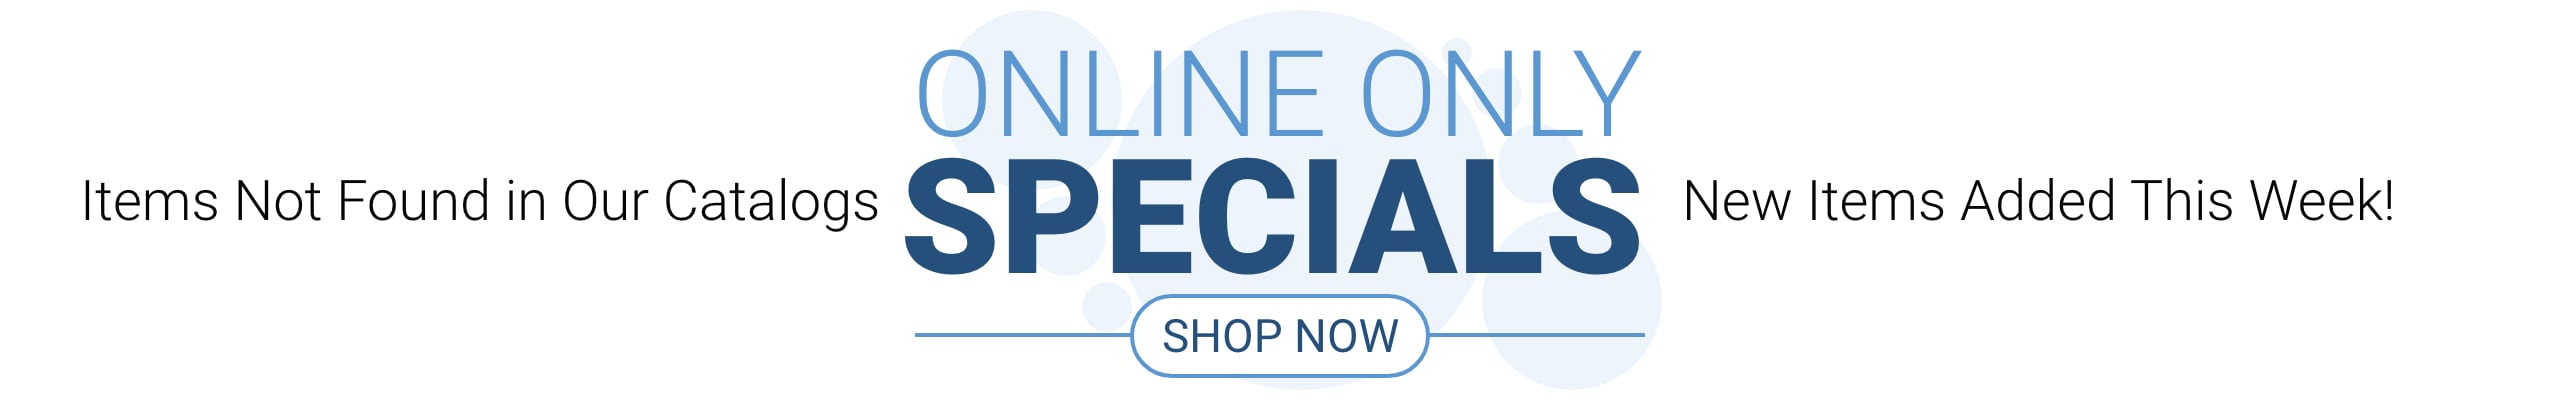 Online Only Specials